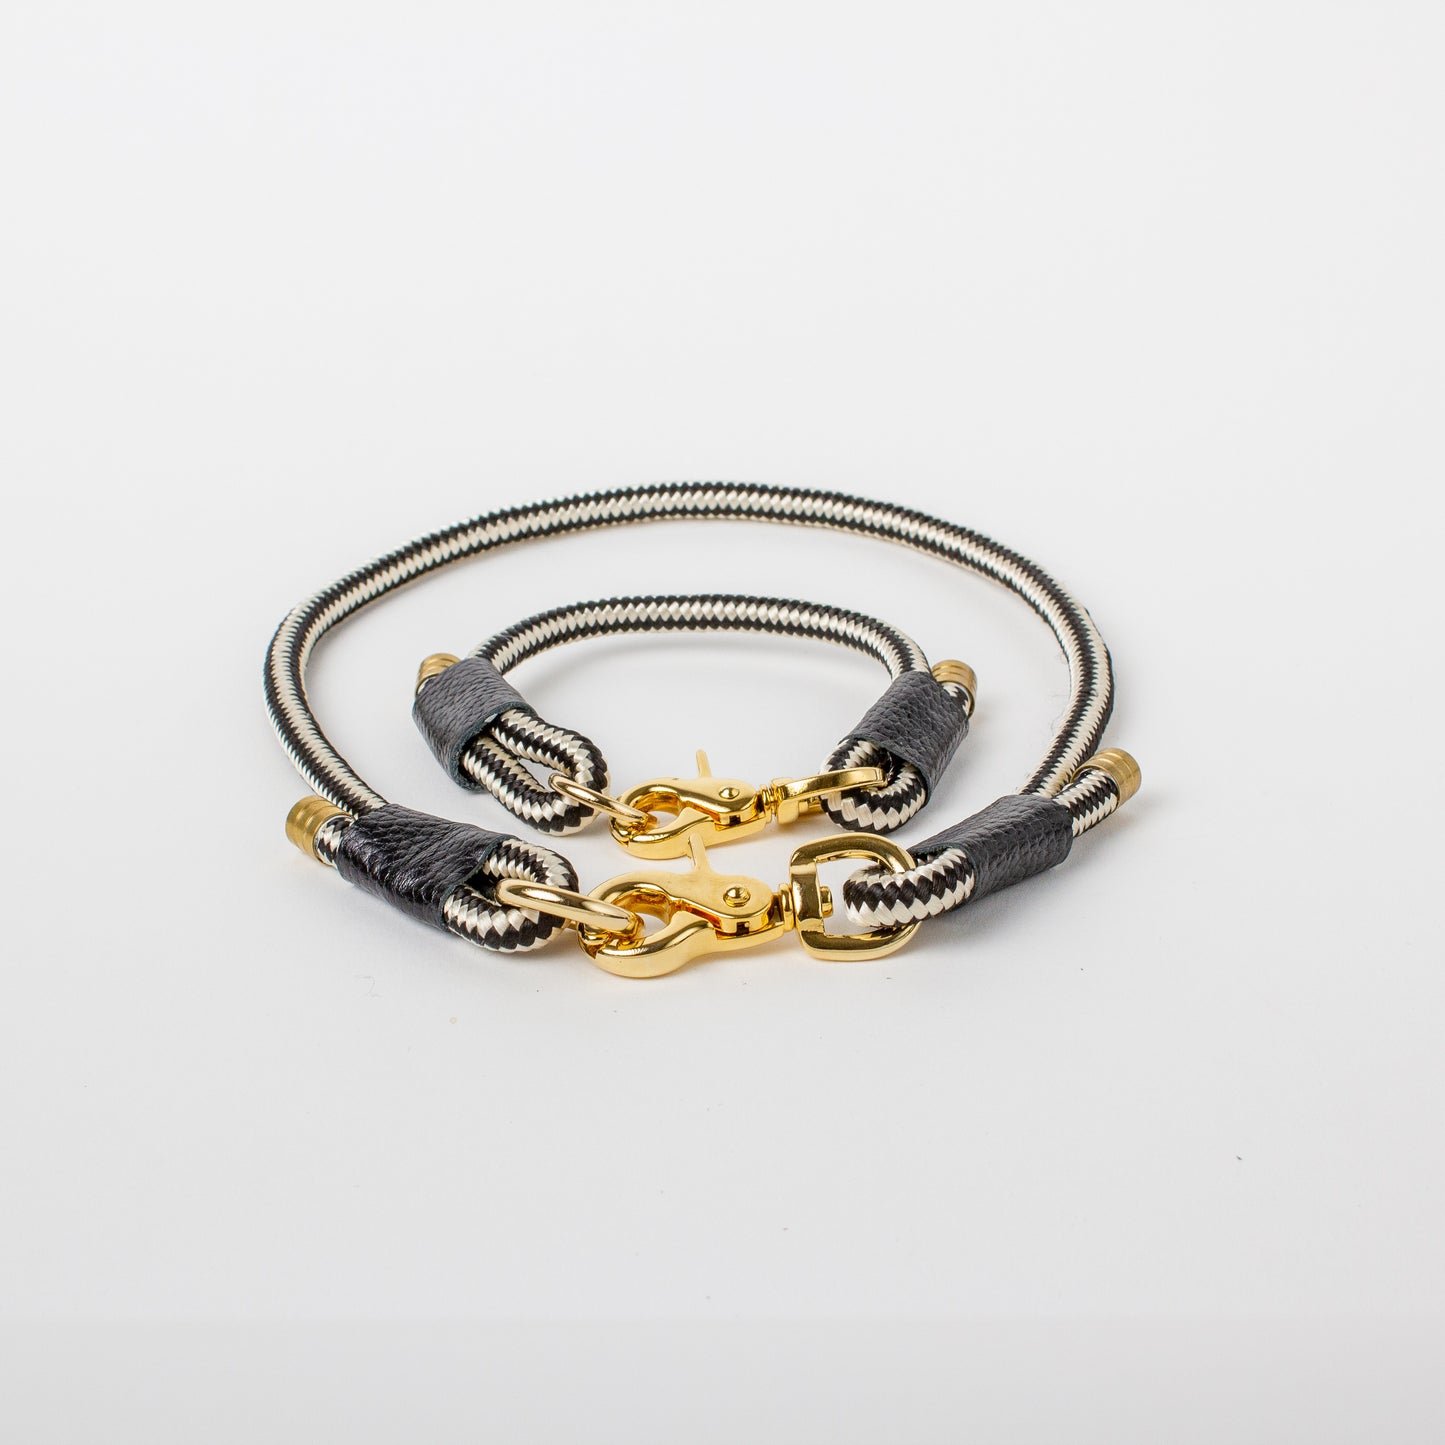 Willow Walks marine rope collar with leather details in ecru and hot pink